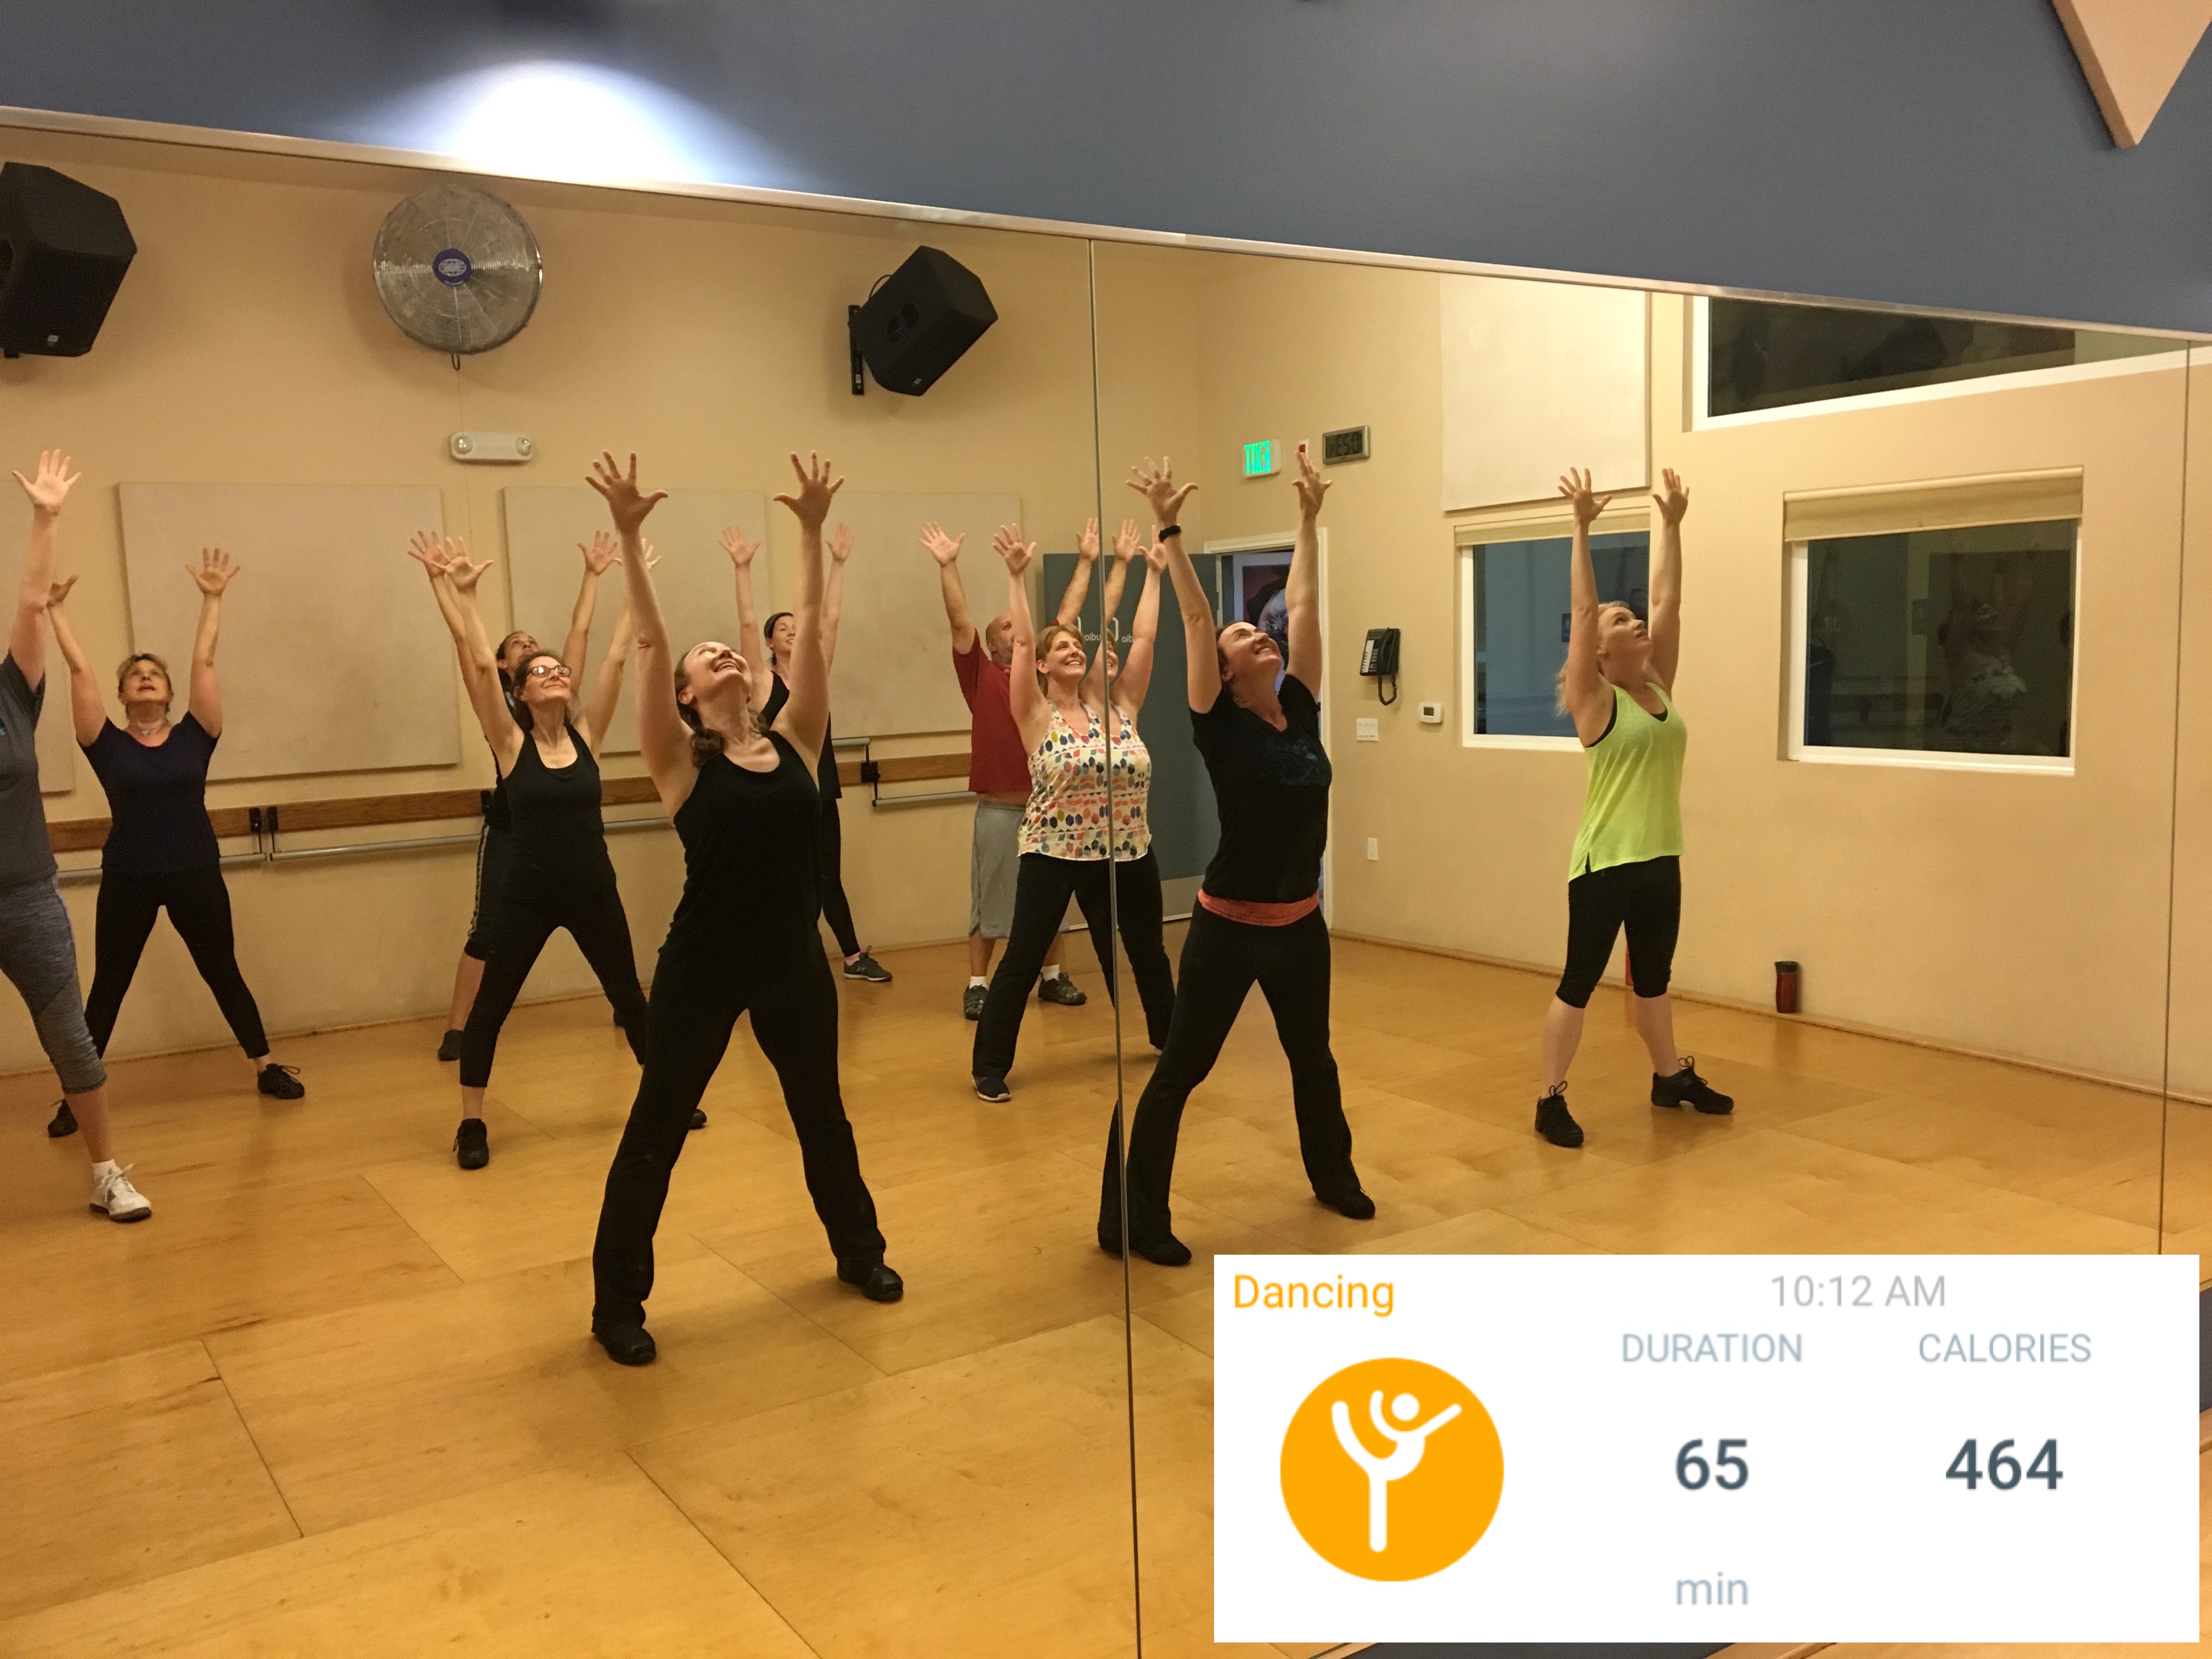 An uplifting moment from Jeanne Simpson's <i>Choreo-bics</i> class”/><figcaption>An uplifting moment from Jeanne Simpson’s <i>Choreo-bics</i> class</figcaption></figure>
<p>So far, we’ve been learning numbers from <i>Hairspray</i>, <i>Singing in the Rain</i>, <i>Fosse</i>, and <i>West Side Story,</i> in the style of choreographers Bob Fosse, Jerome Robbins, Gene Kelly, and Jerry Mitchell. Once we get the dance steps down, we progress to dancing the steps as a specific character from the show. For example, during one class my students transform into chorus girls from the 1920s, and in another, gang members from the 1950s.</p>
<p>I have students who have danced in multiple Broadway shows, and others who have never been to a dance class before, so I take the Broadway numbers and choreograph my own versions, incorporating a few steps from the original dances plus my own steps that teach the essence of each choreographer’s style. Some of my students have said that learning each dance is like learning a new language, because each choreographer’s style of movement is so unique and specific.</p>

<figure class=